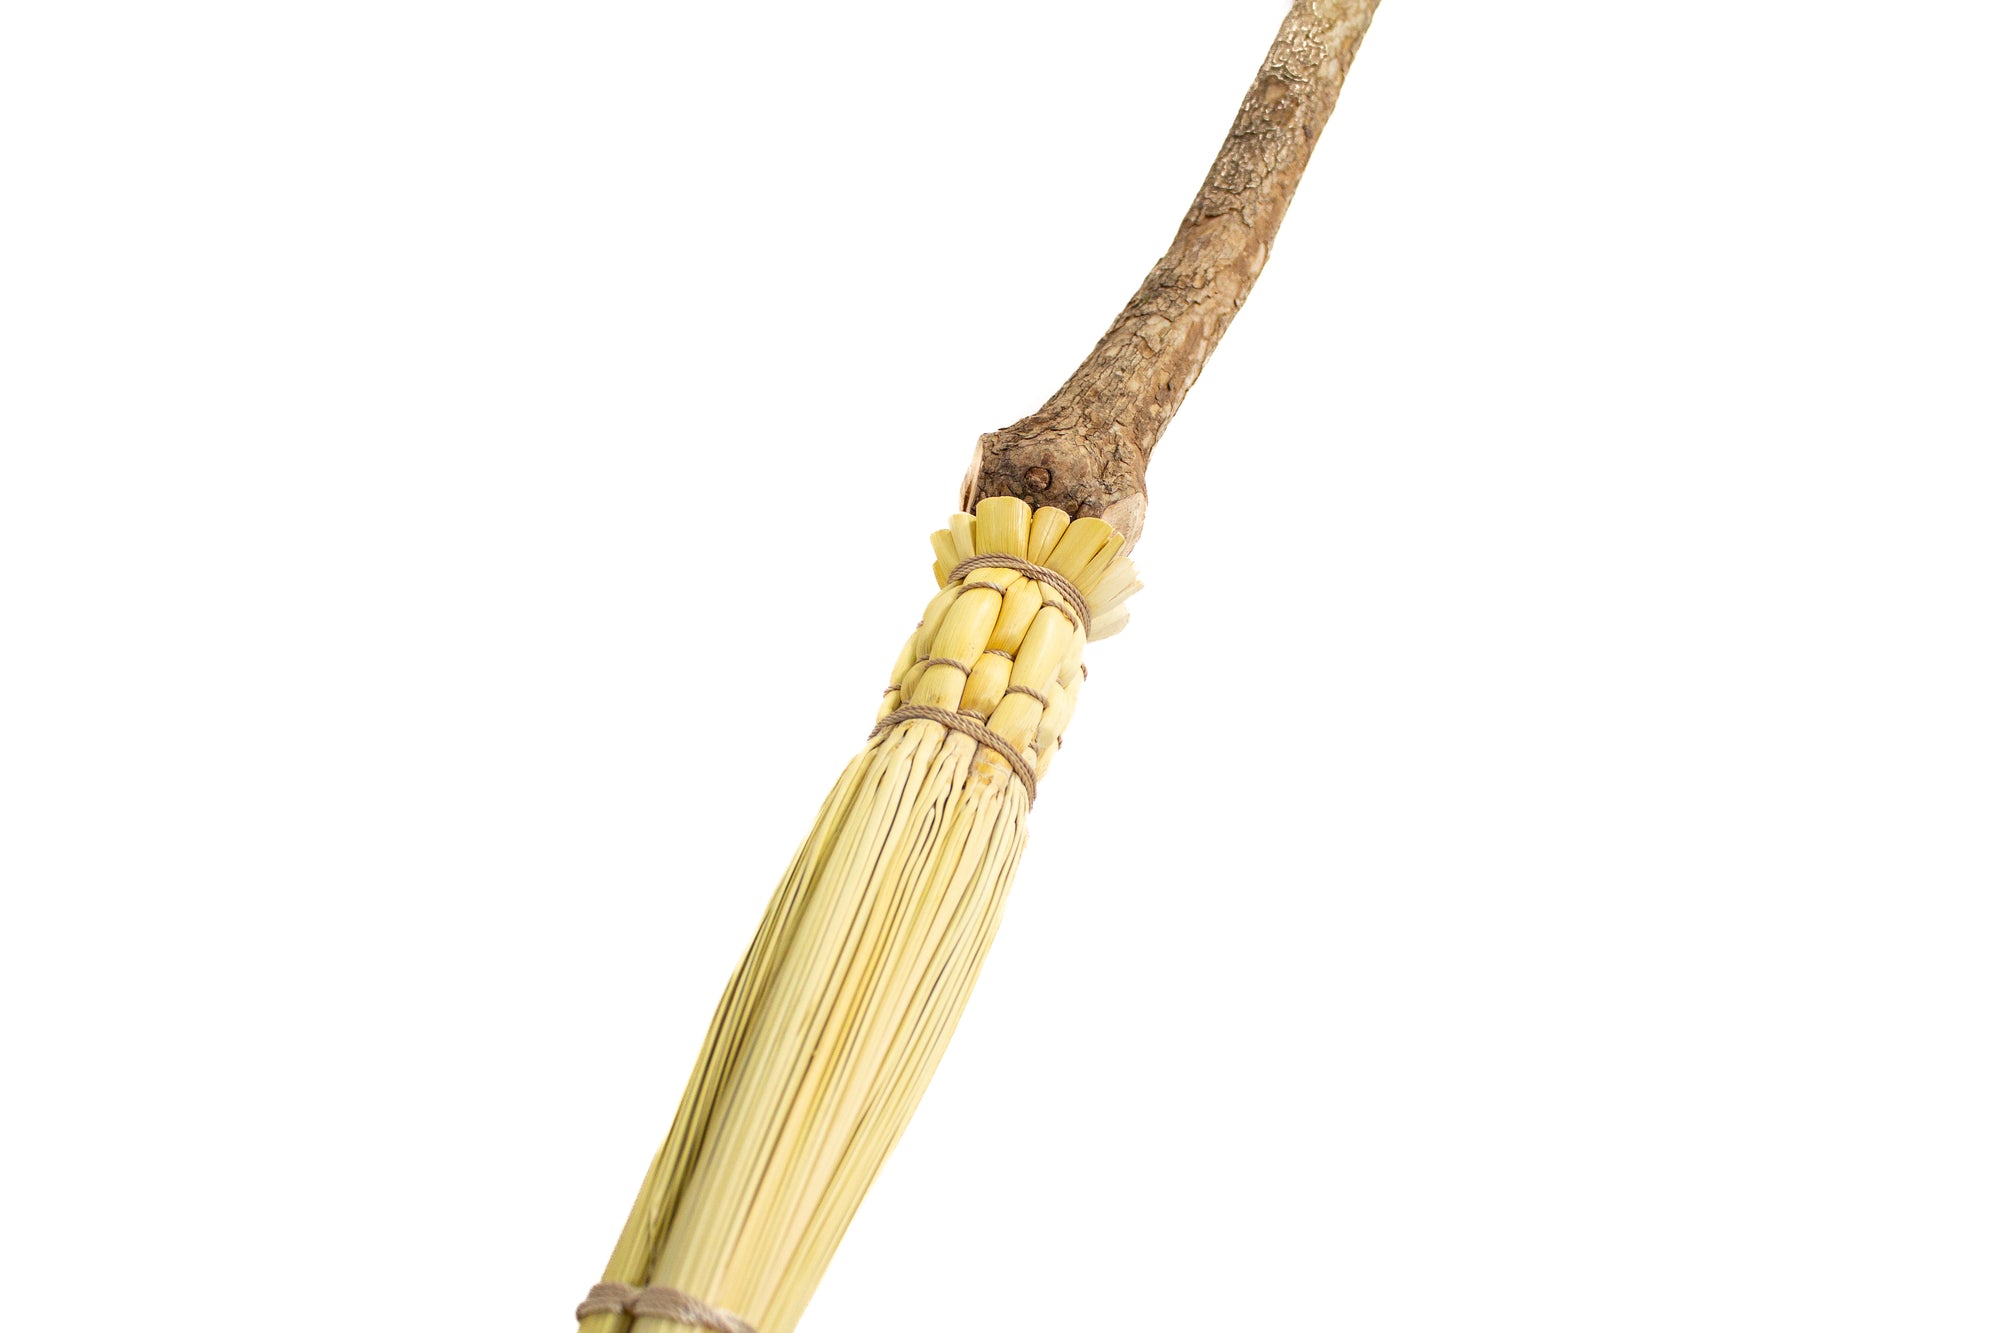 Cobwebber Broom (Pick Up or In Person Purchase Only)